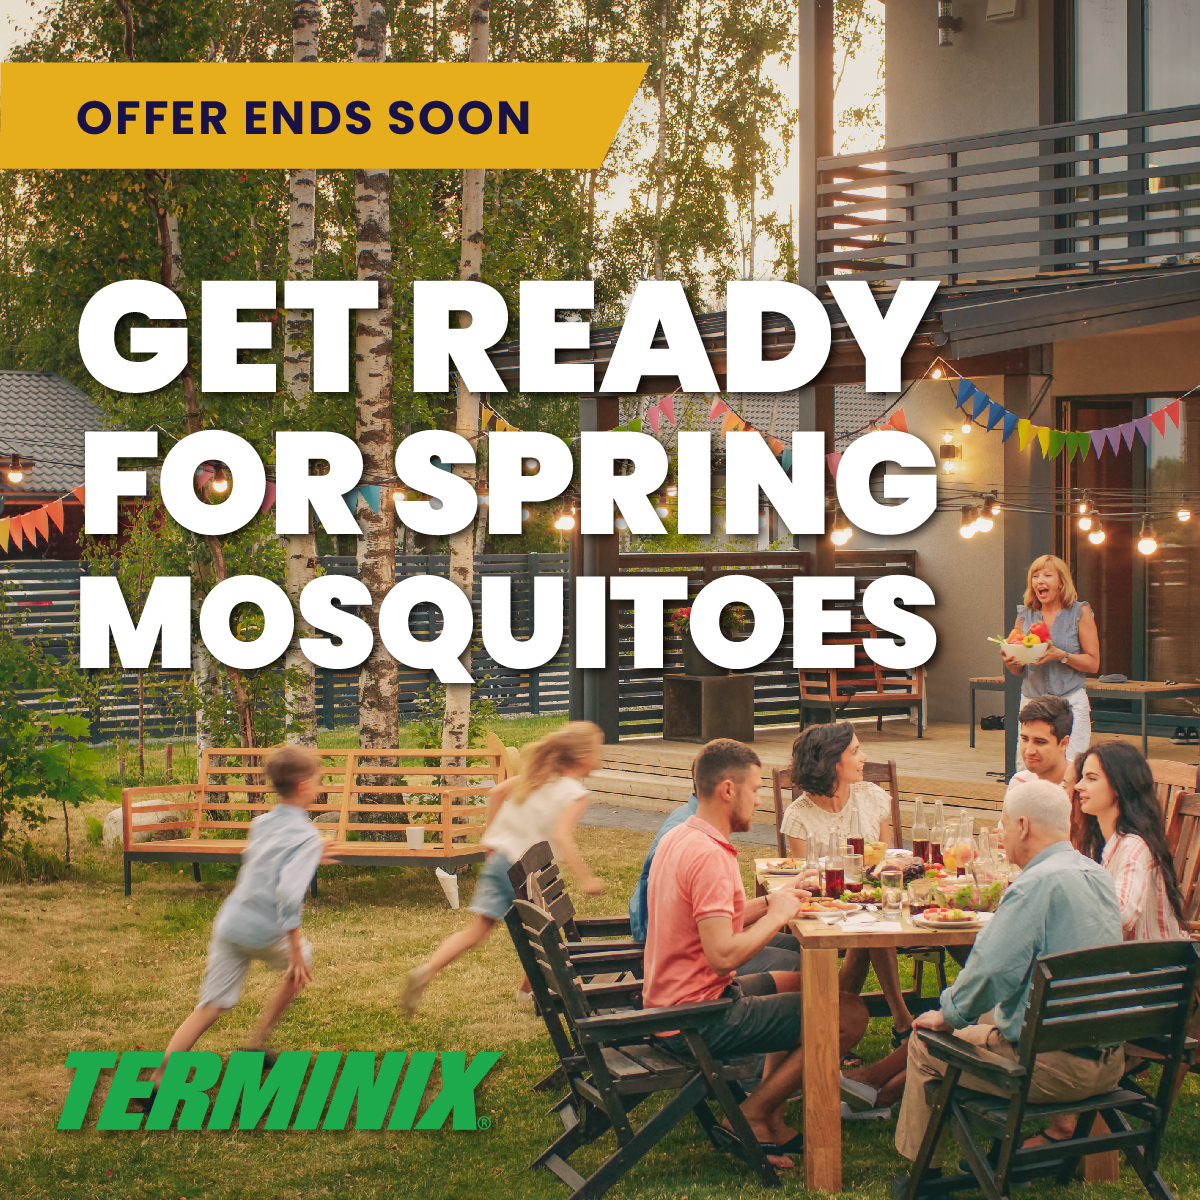 Keep your yard, family, and pets protected from mosquitoes this spring. With these pre-season savings, start mosquito control today for only $49 while this offer lasts. Limitations and exclusions apply. hubs.ly/Q01LlgSS0